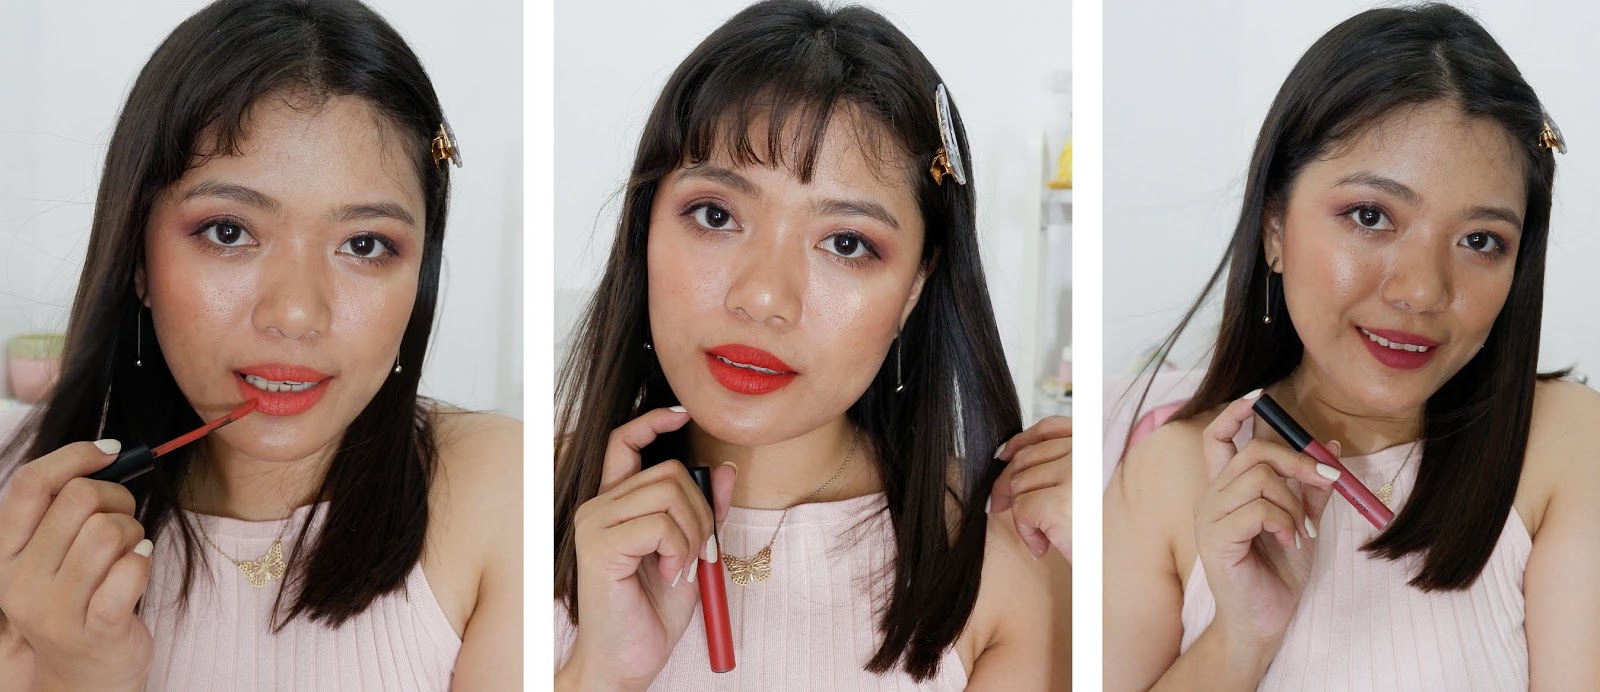 HERE'S WHAT TO EXPECT FROM INGA FLAT LIQUID LIPSTICK (SWATCHES & REVIEW)